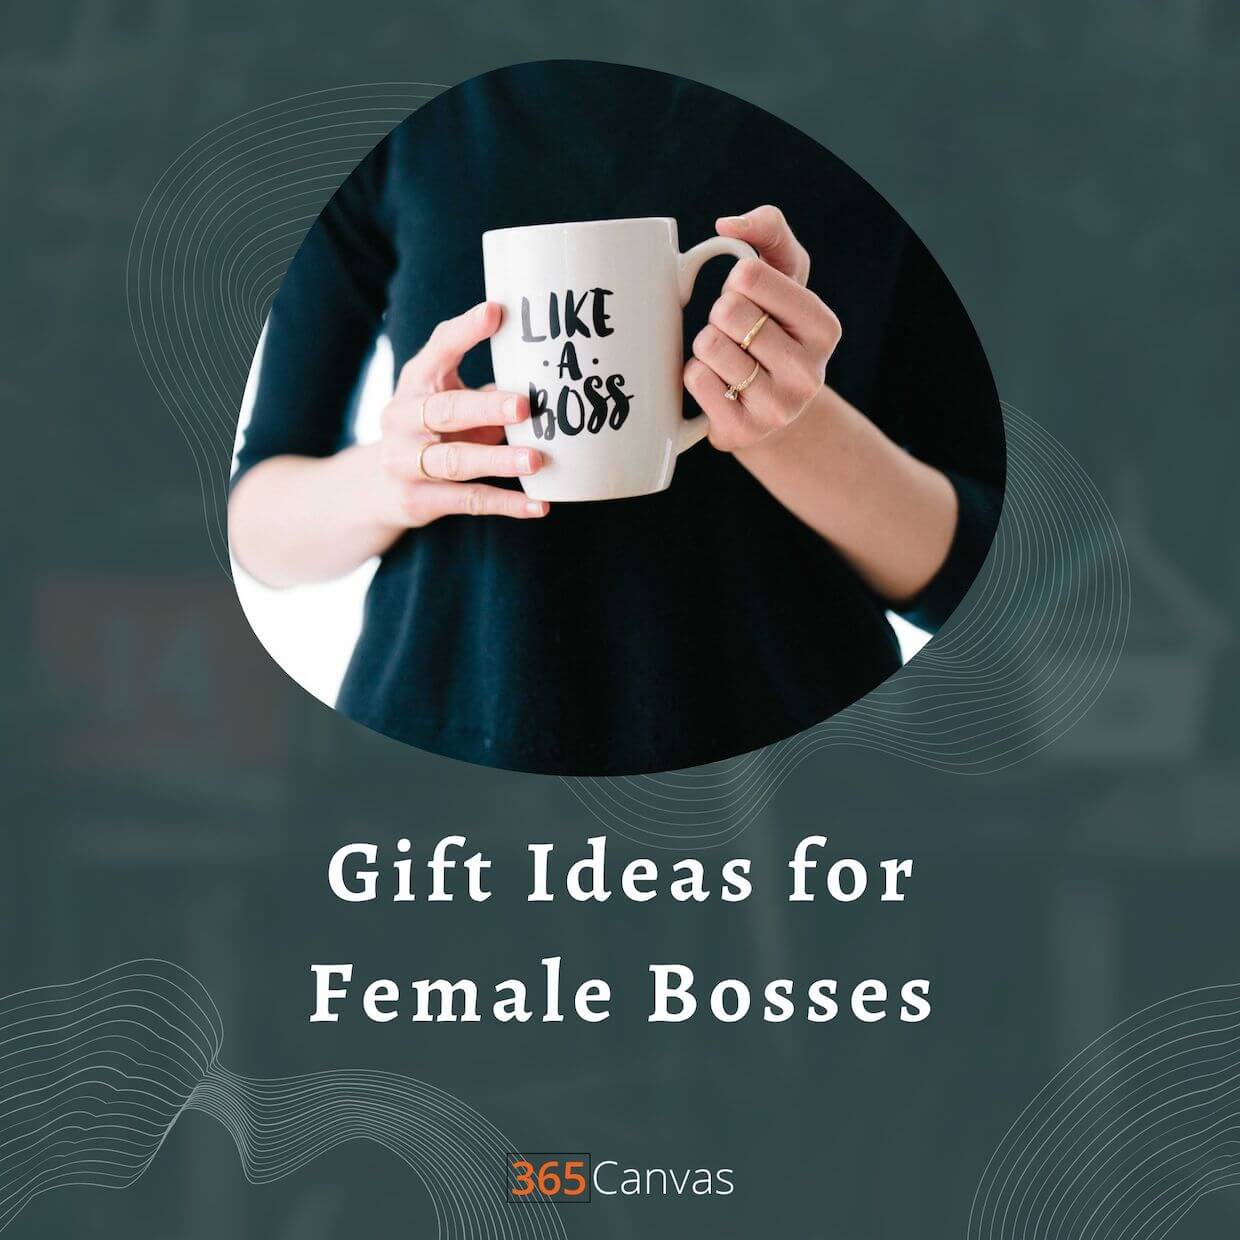 Buy Boss Lady Mug  Best Gifts for Mom and Boss Women Friend  Funny  Birthday Gifts for Boss Babe Girl Boss Best Boss Girlfriend Wife  Pink  Marble Mugs Ceramic 115oz